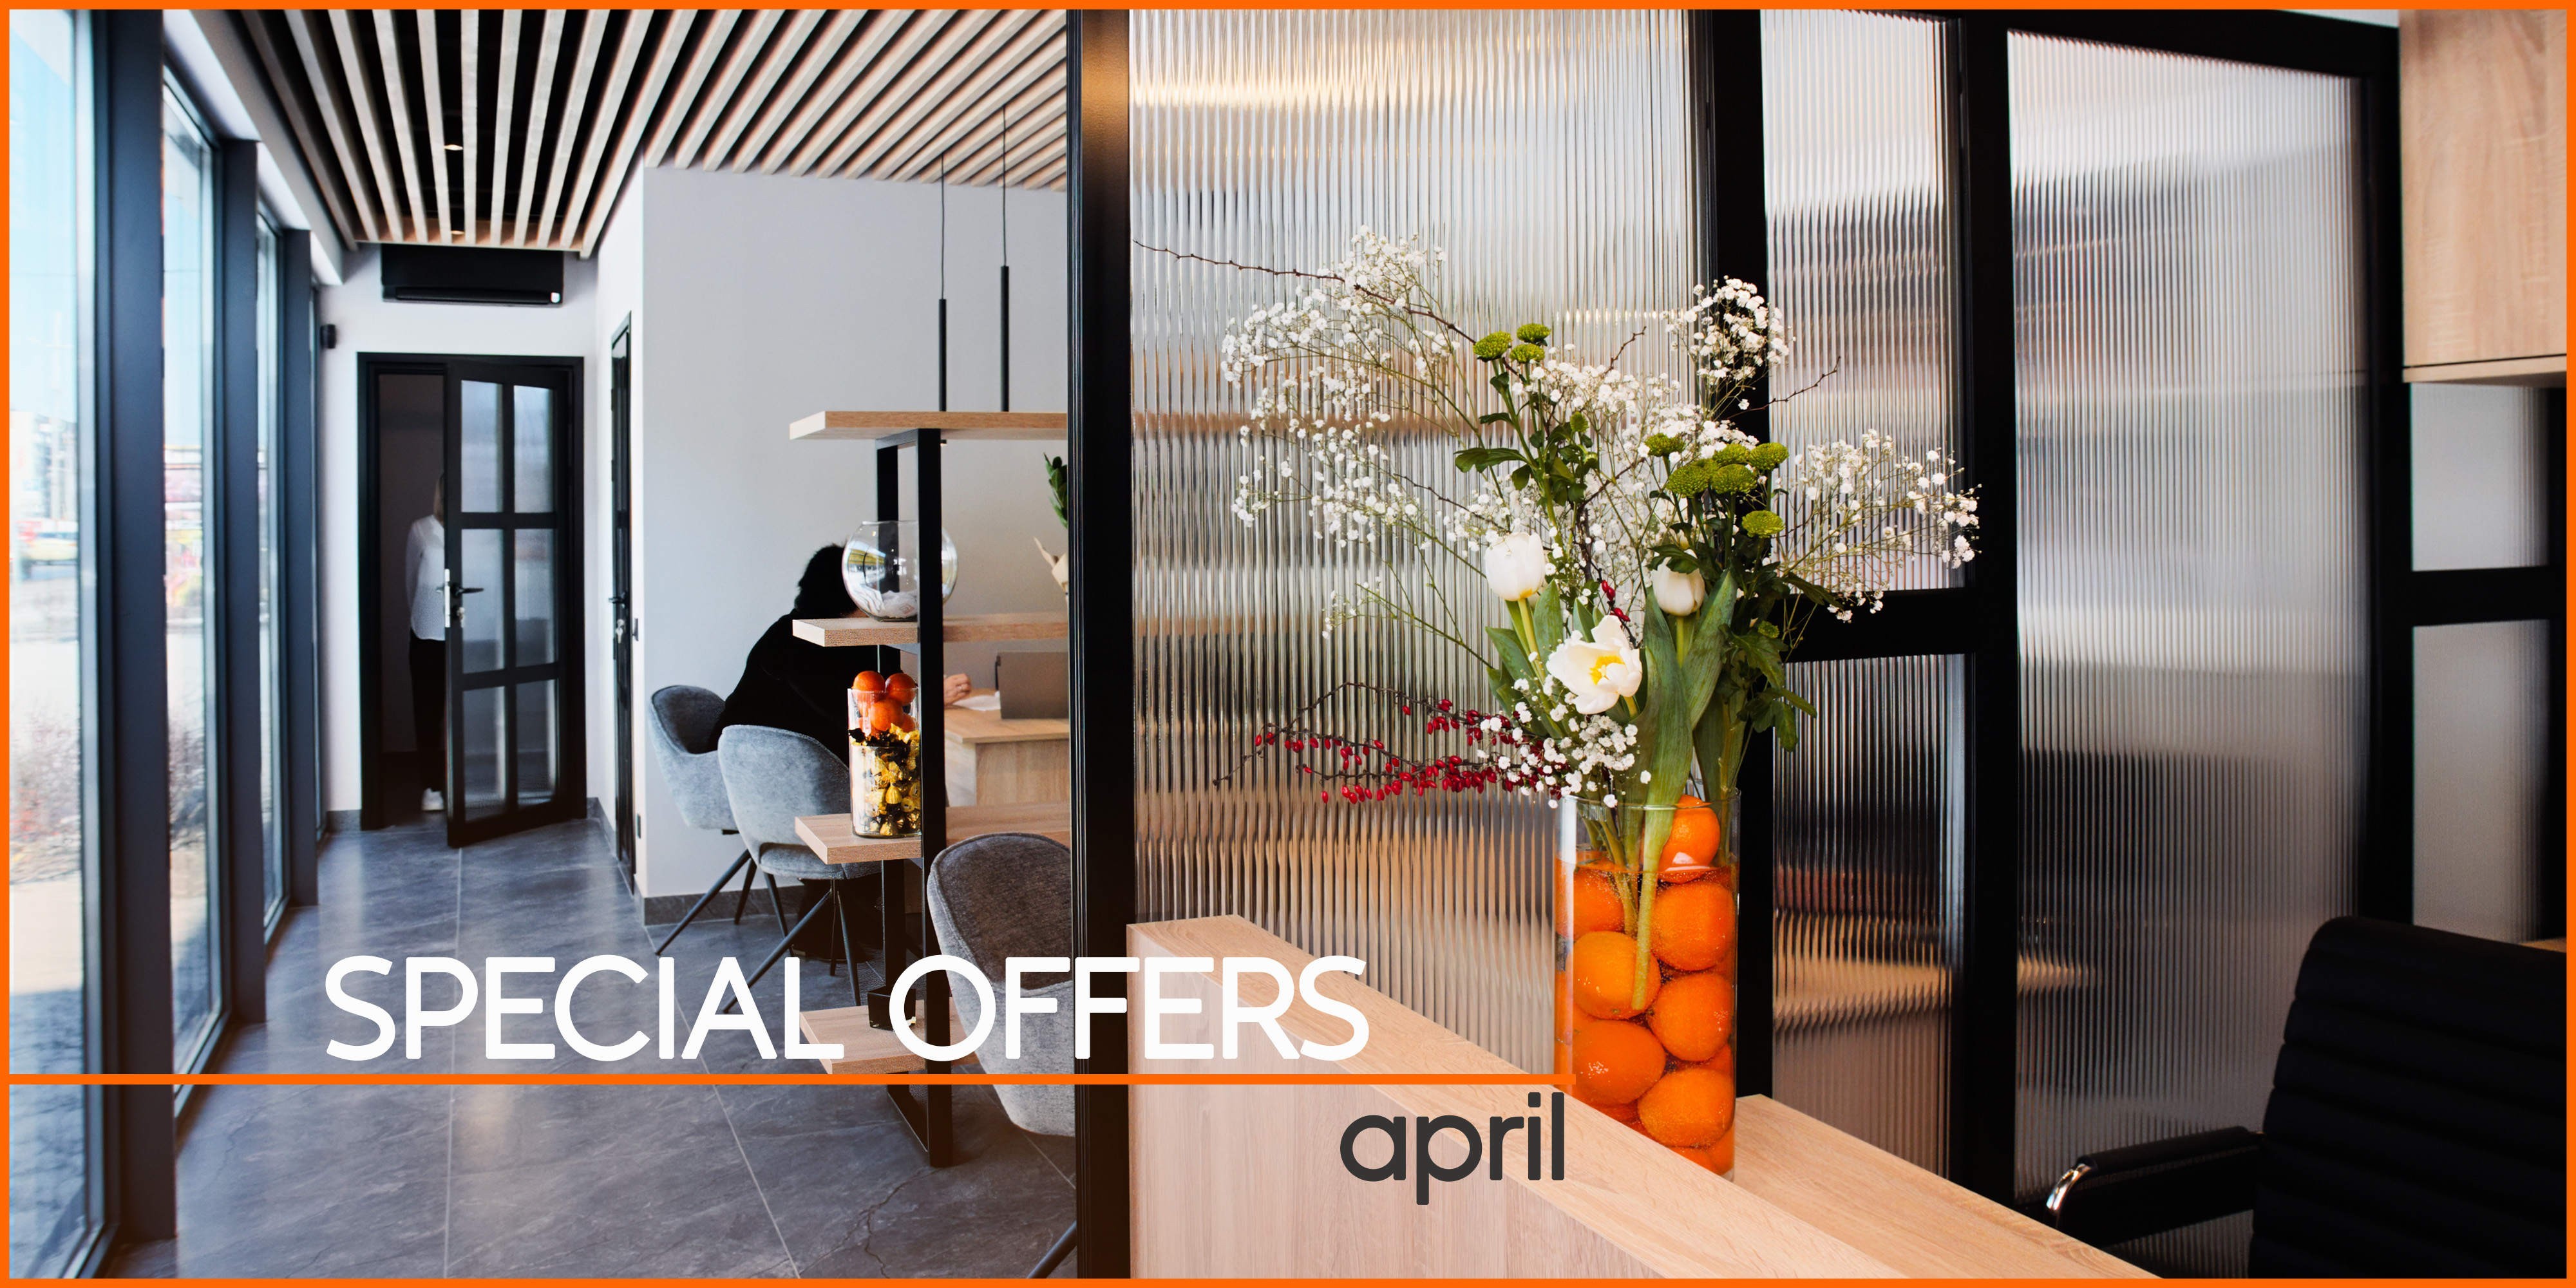 APRIL: SPECIAL OFFERS FROM S1 OBOLON